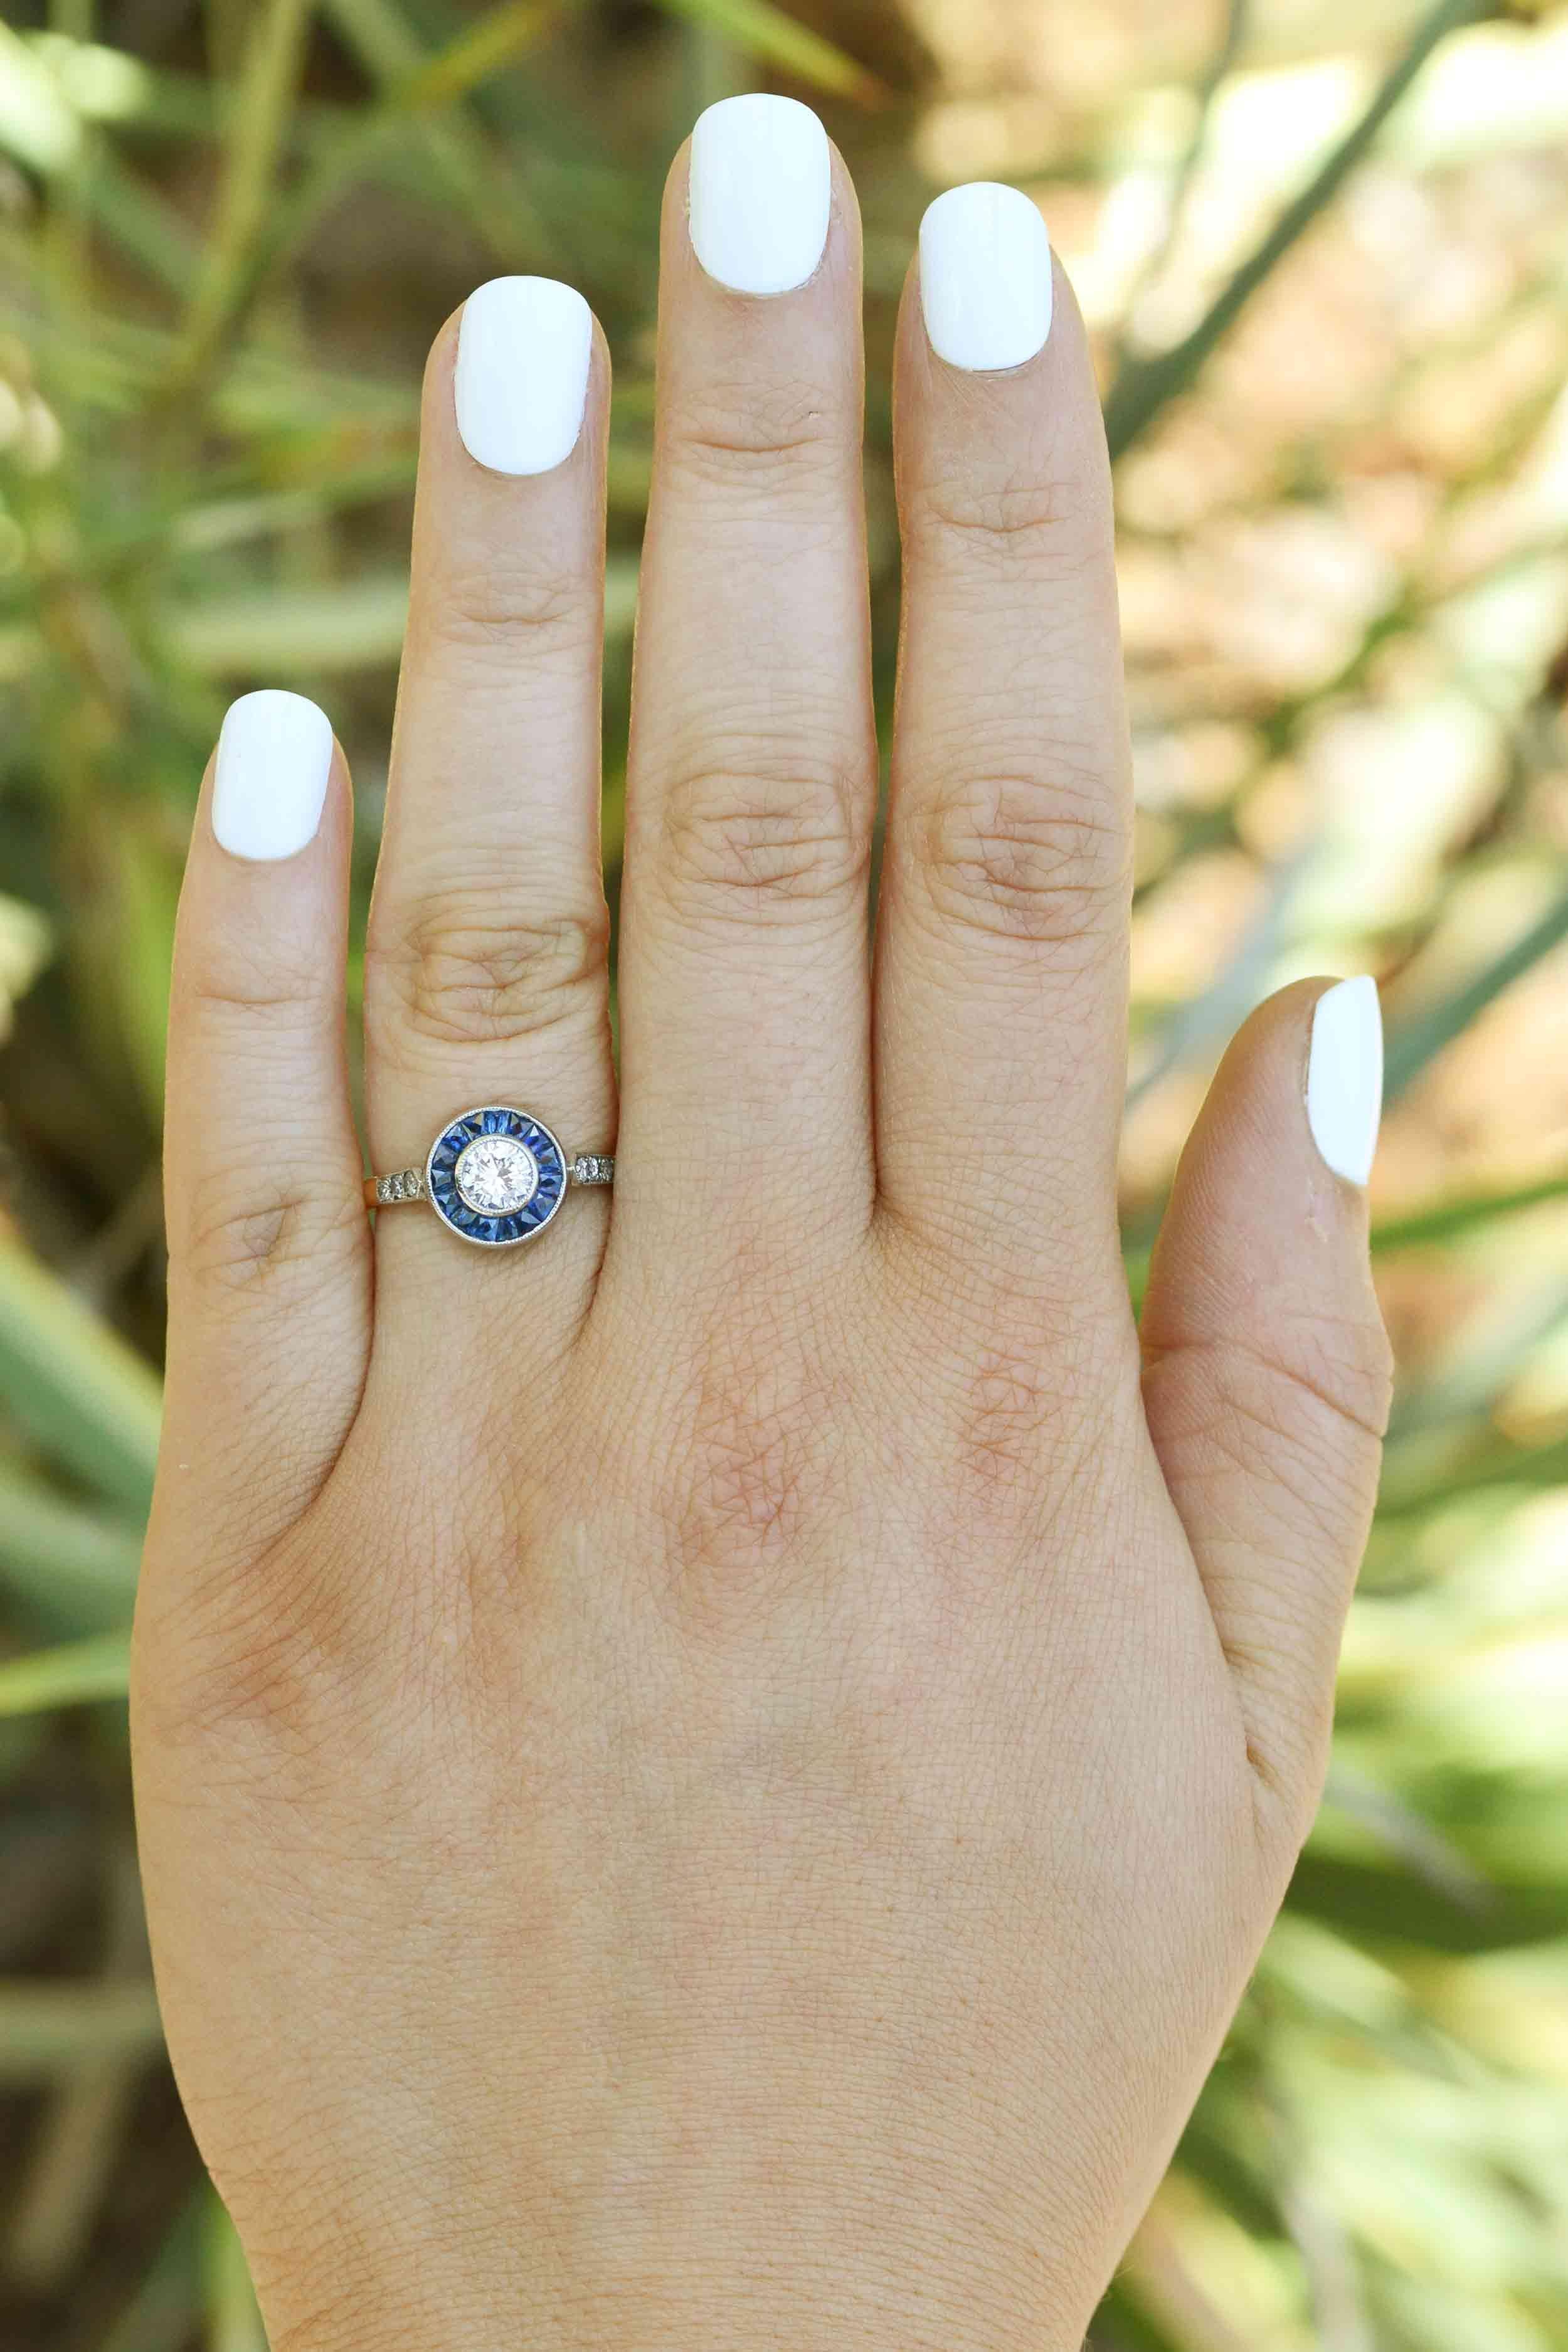 The Brentwood is an enchanting 1920's Art Deco diamond and sapphire target engagement ring centered by a lively, fiery 1/2 carat round diamond. The halo of velvety-blue calibre' cut sapphires embraced by a milgrain-kissed low bezel setting makes it